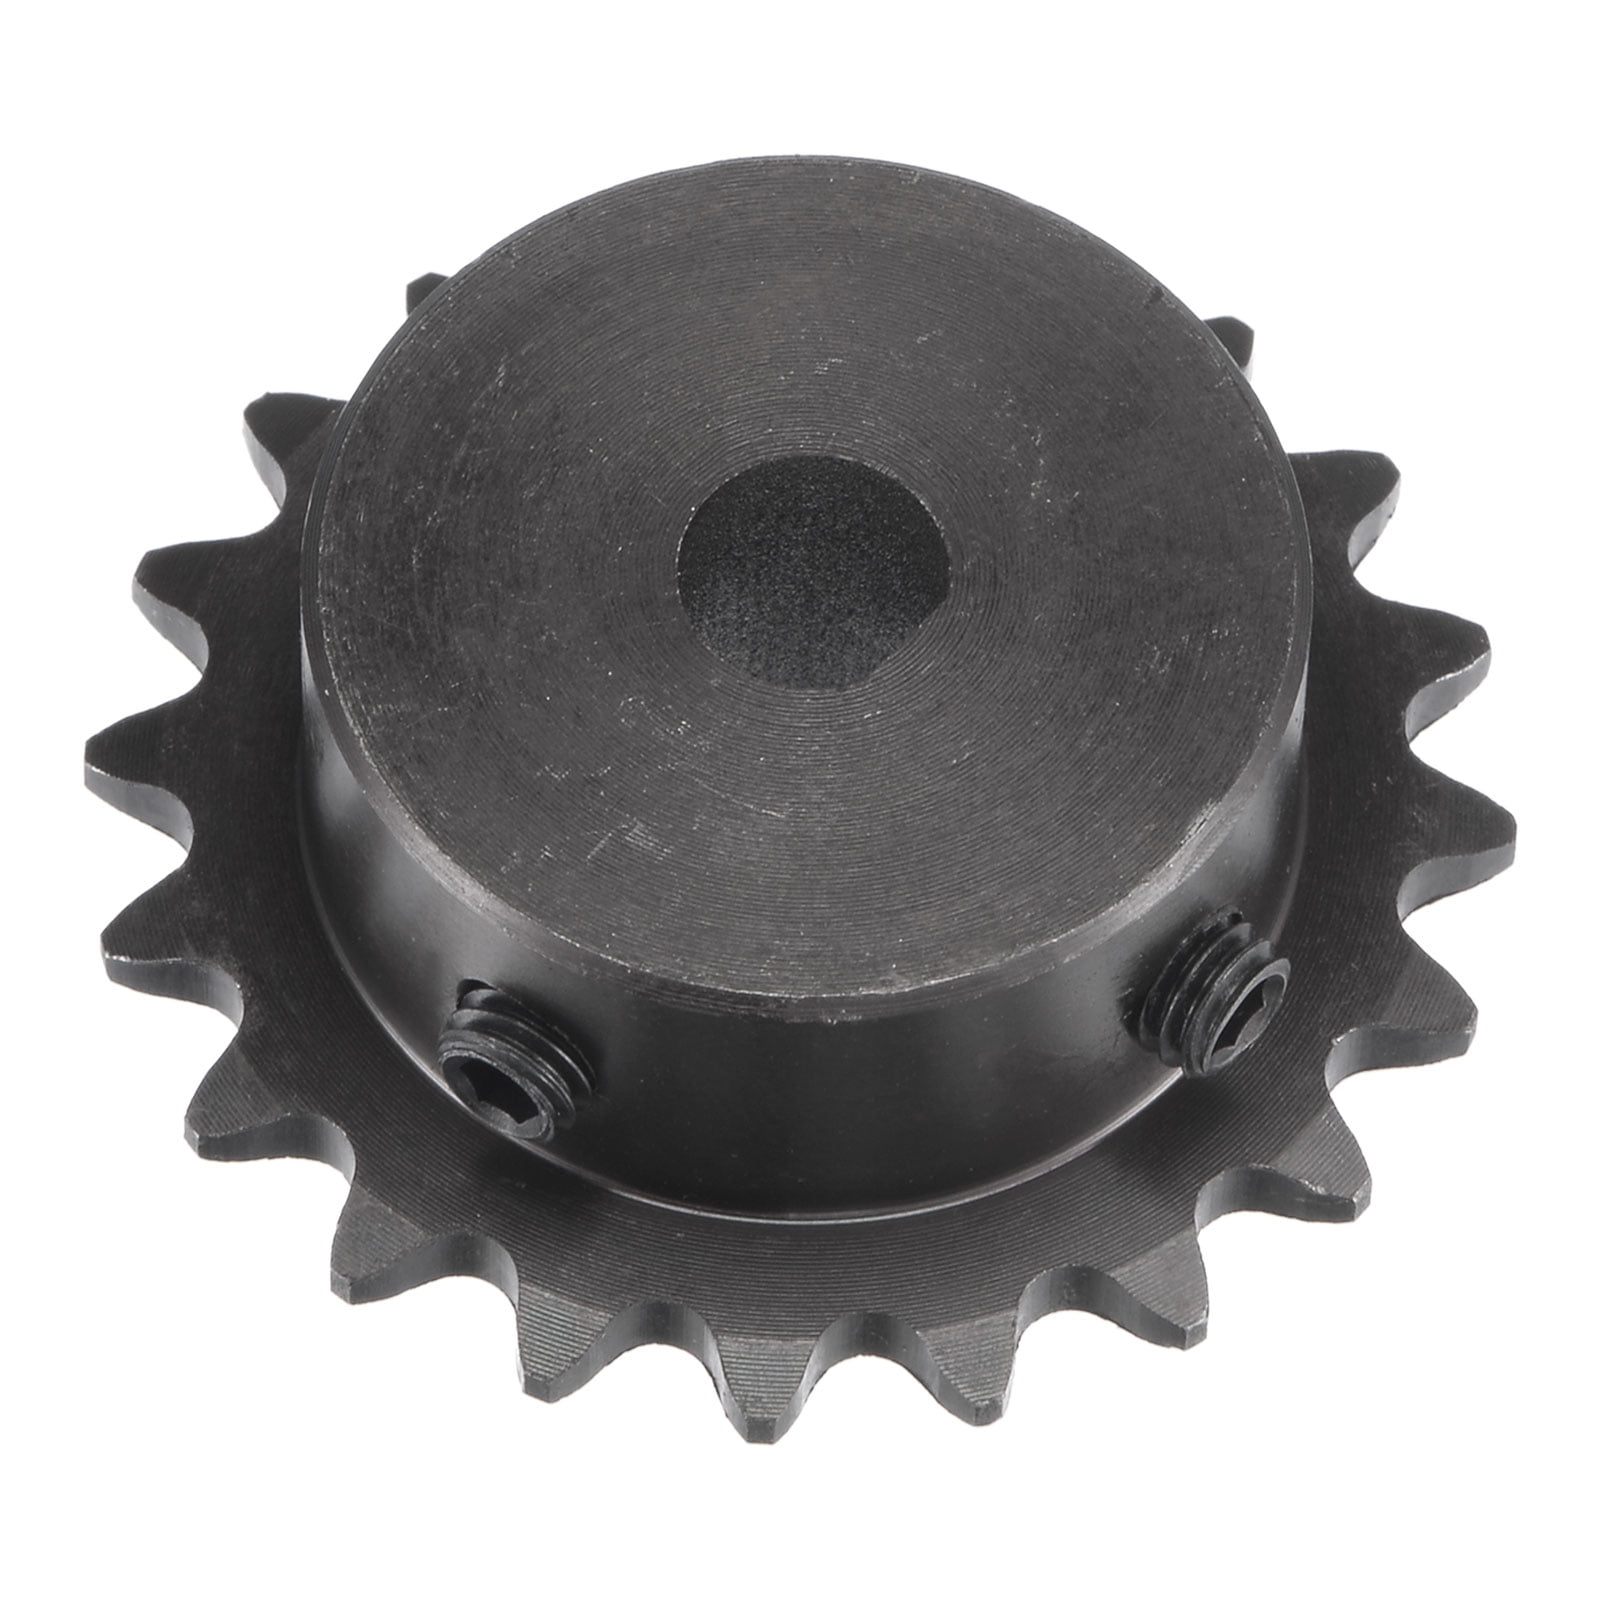 12 tooth sprocket with 2 X 12mm NUTS for 1 hp motors with 12mm shafts 